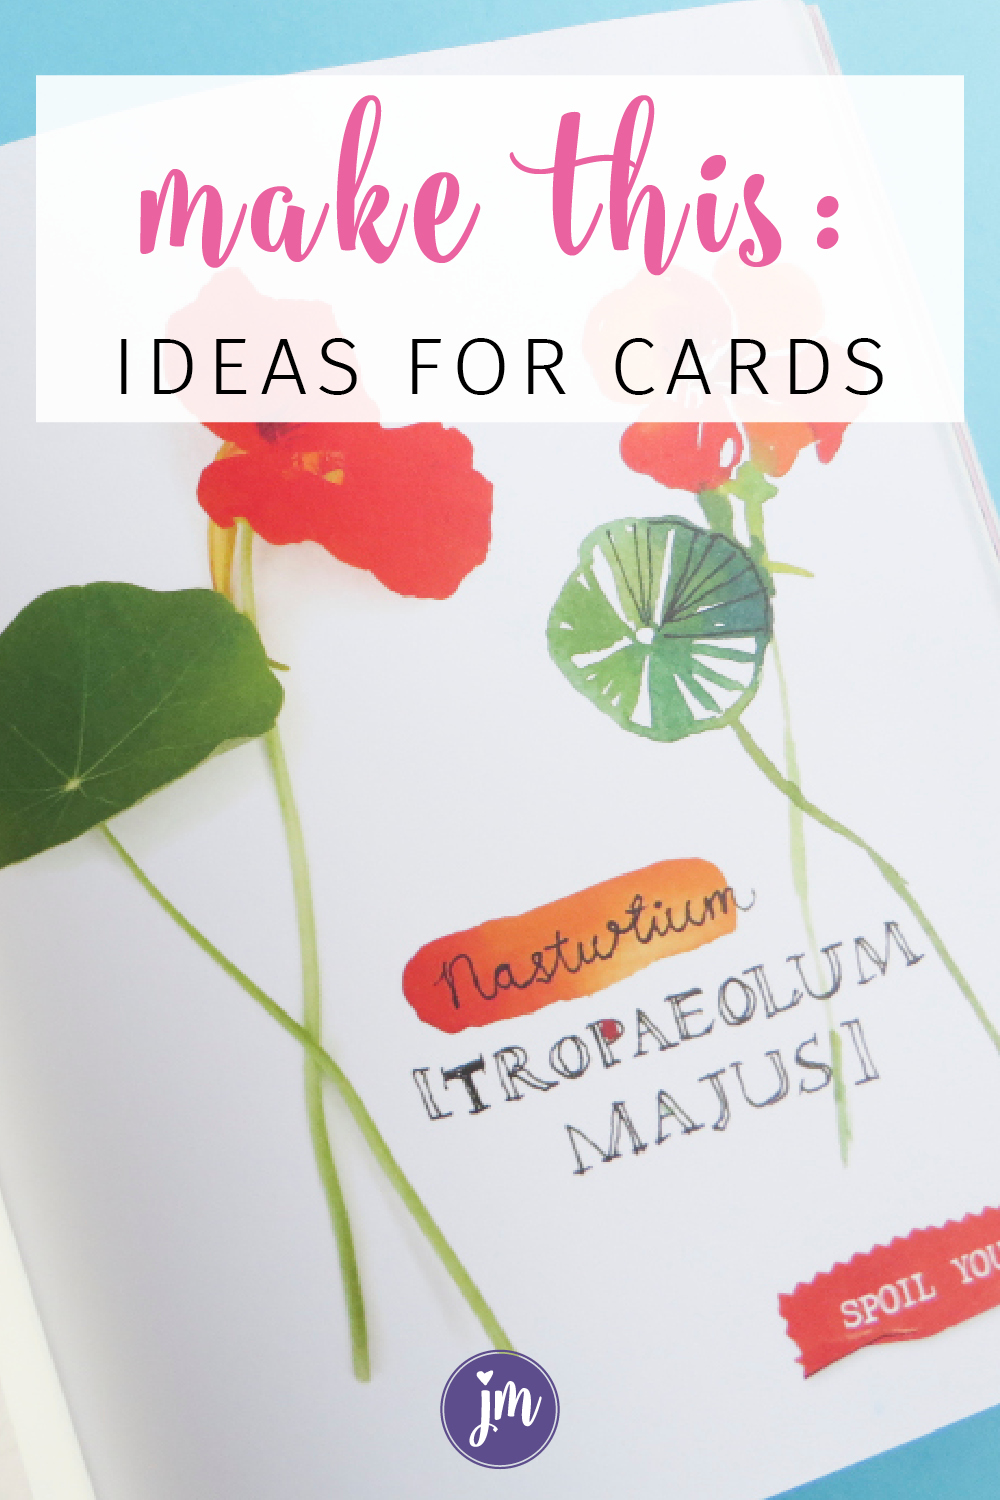 Get inspired by Flow magazine with these creative ideas for cards and art! Love this creative prompt! I'll be filling up my art journal with these! And don't even get me started with the letter writing bit. I've already made a couple of these for my pen pals. :)